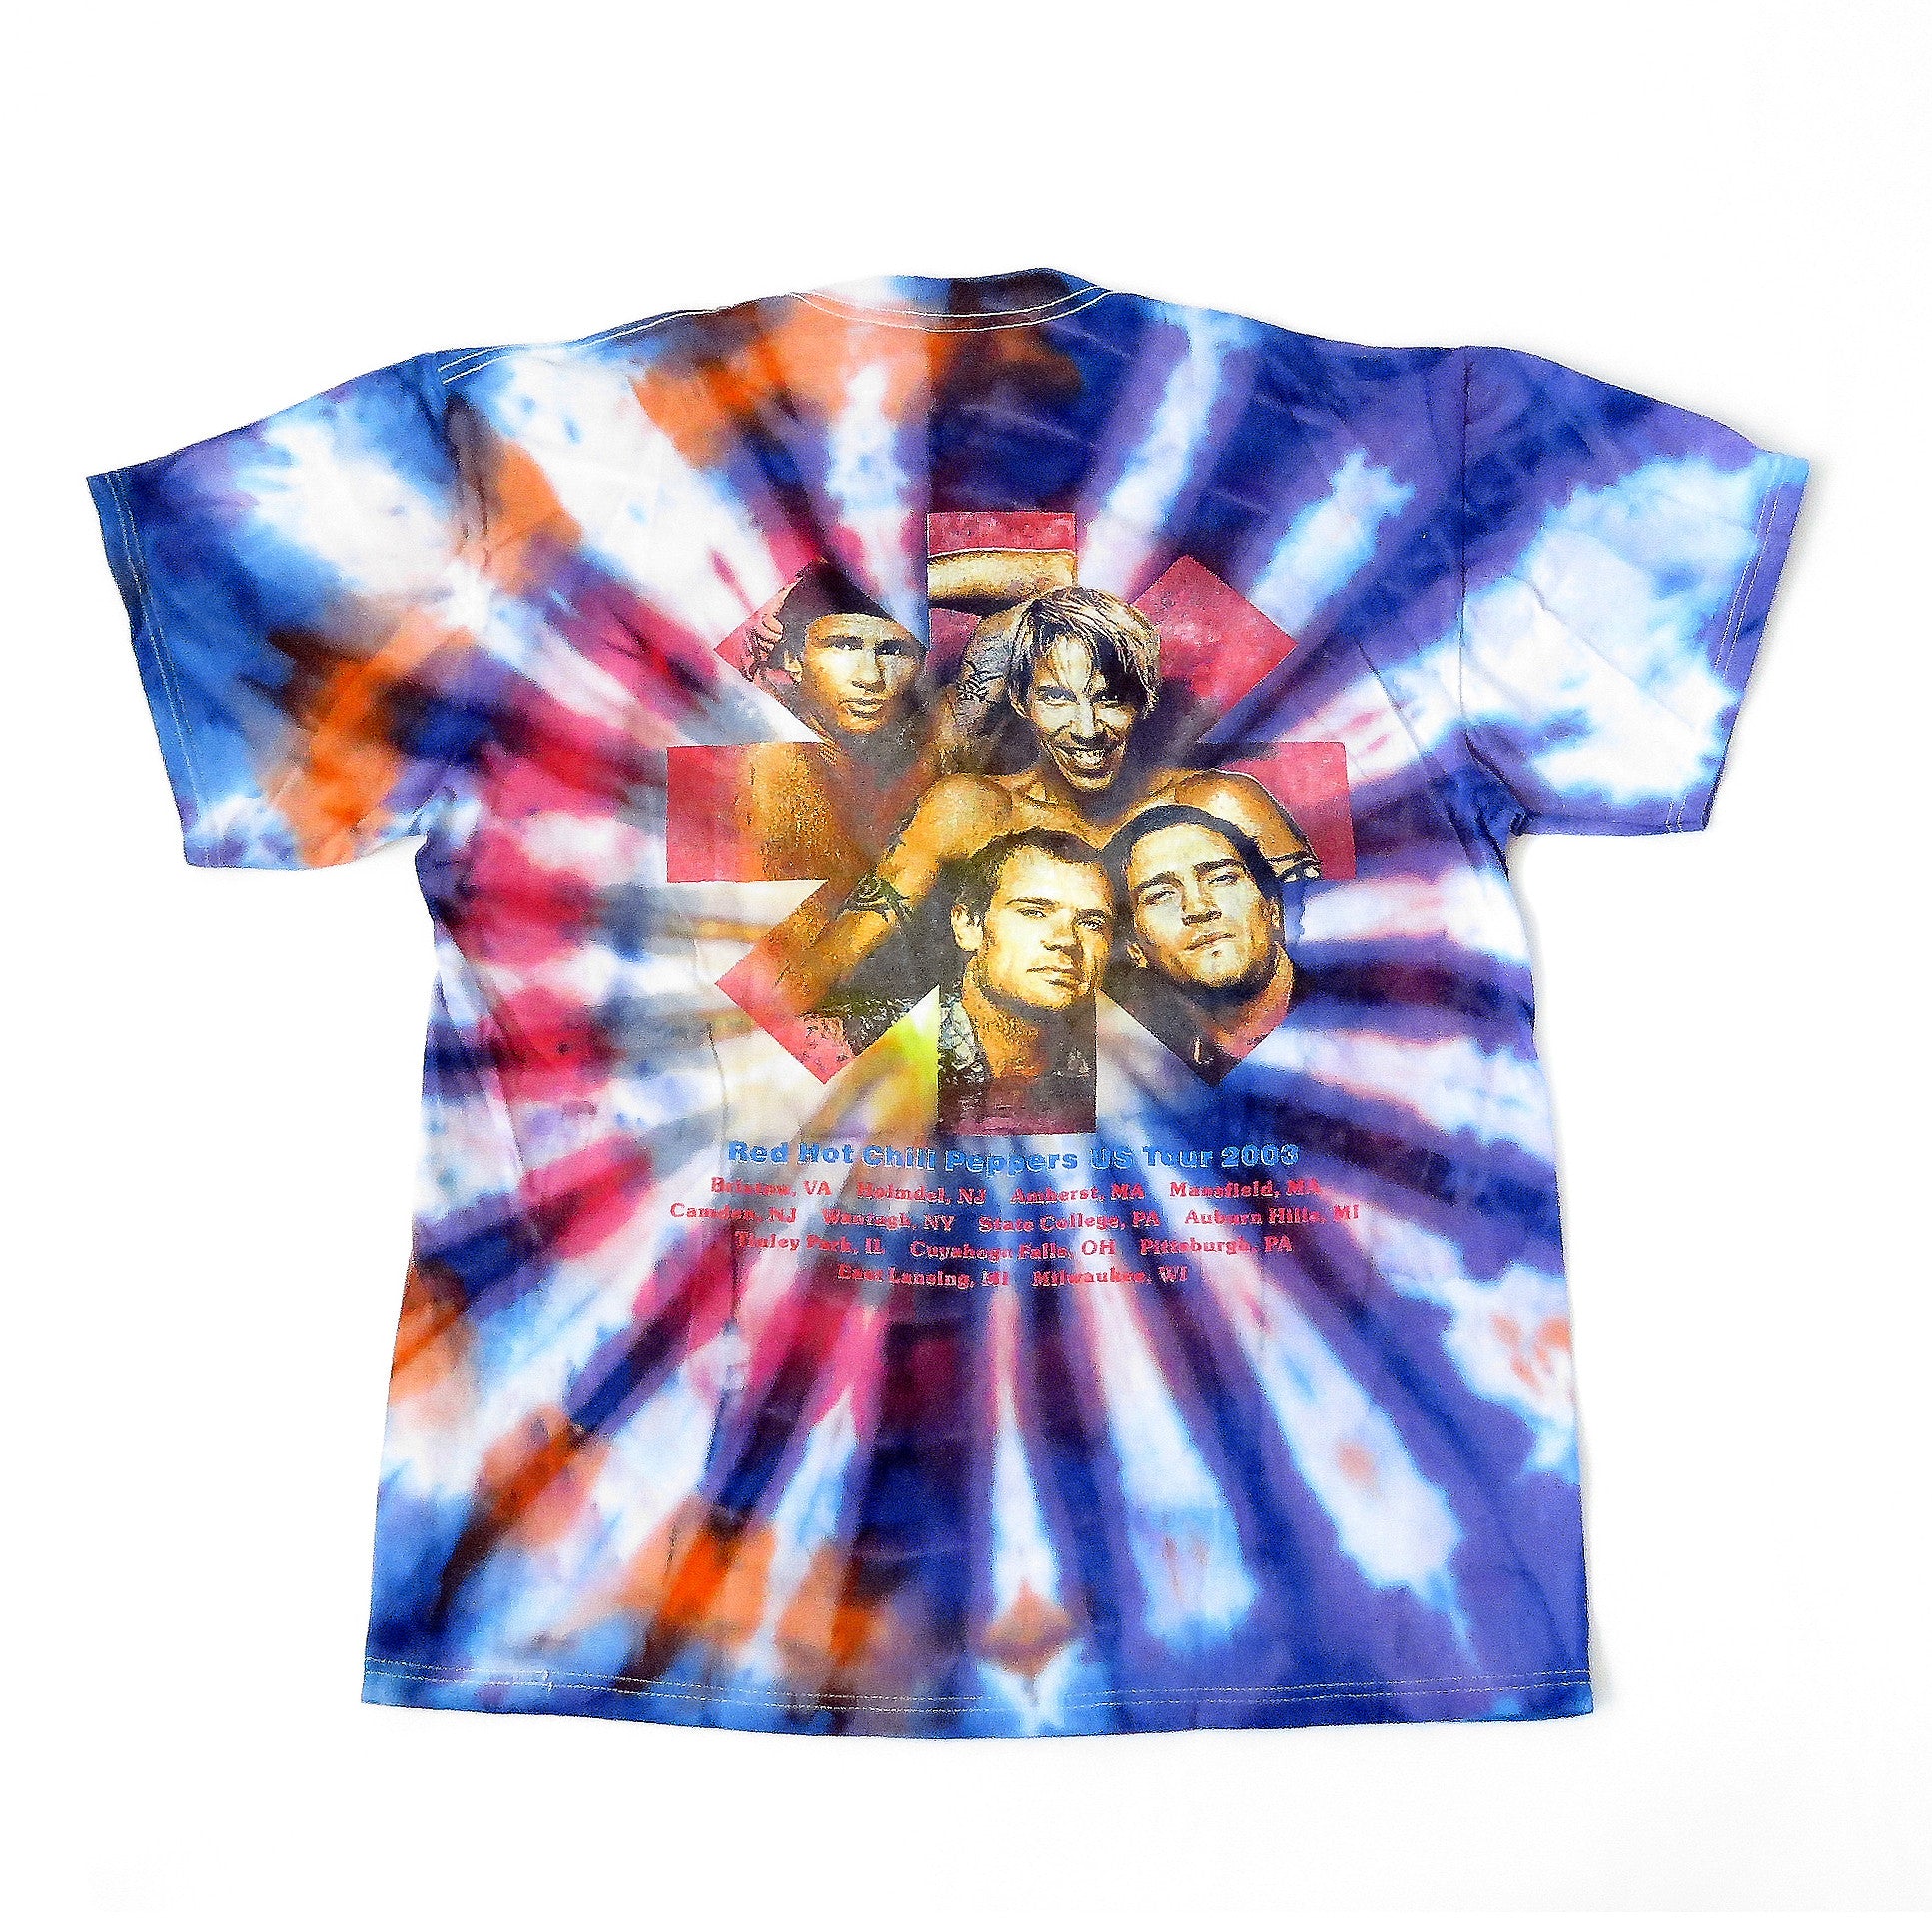 Red Hot Chili Peppers Tie-Dye By The Way Tour T-Shirt Sz L